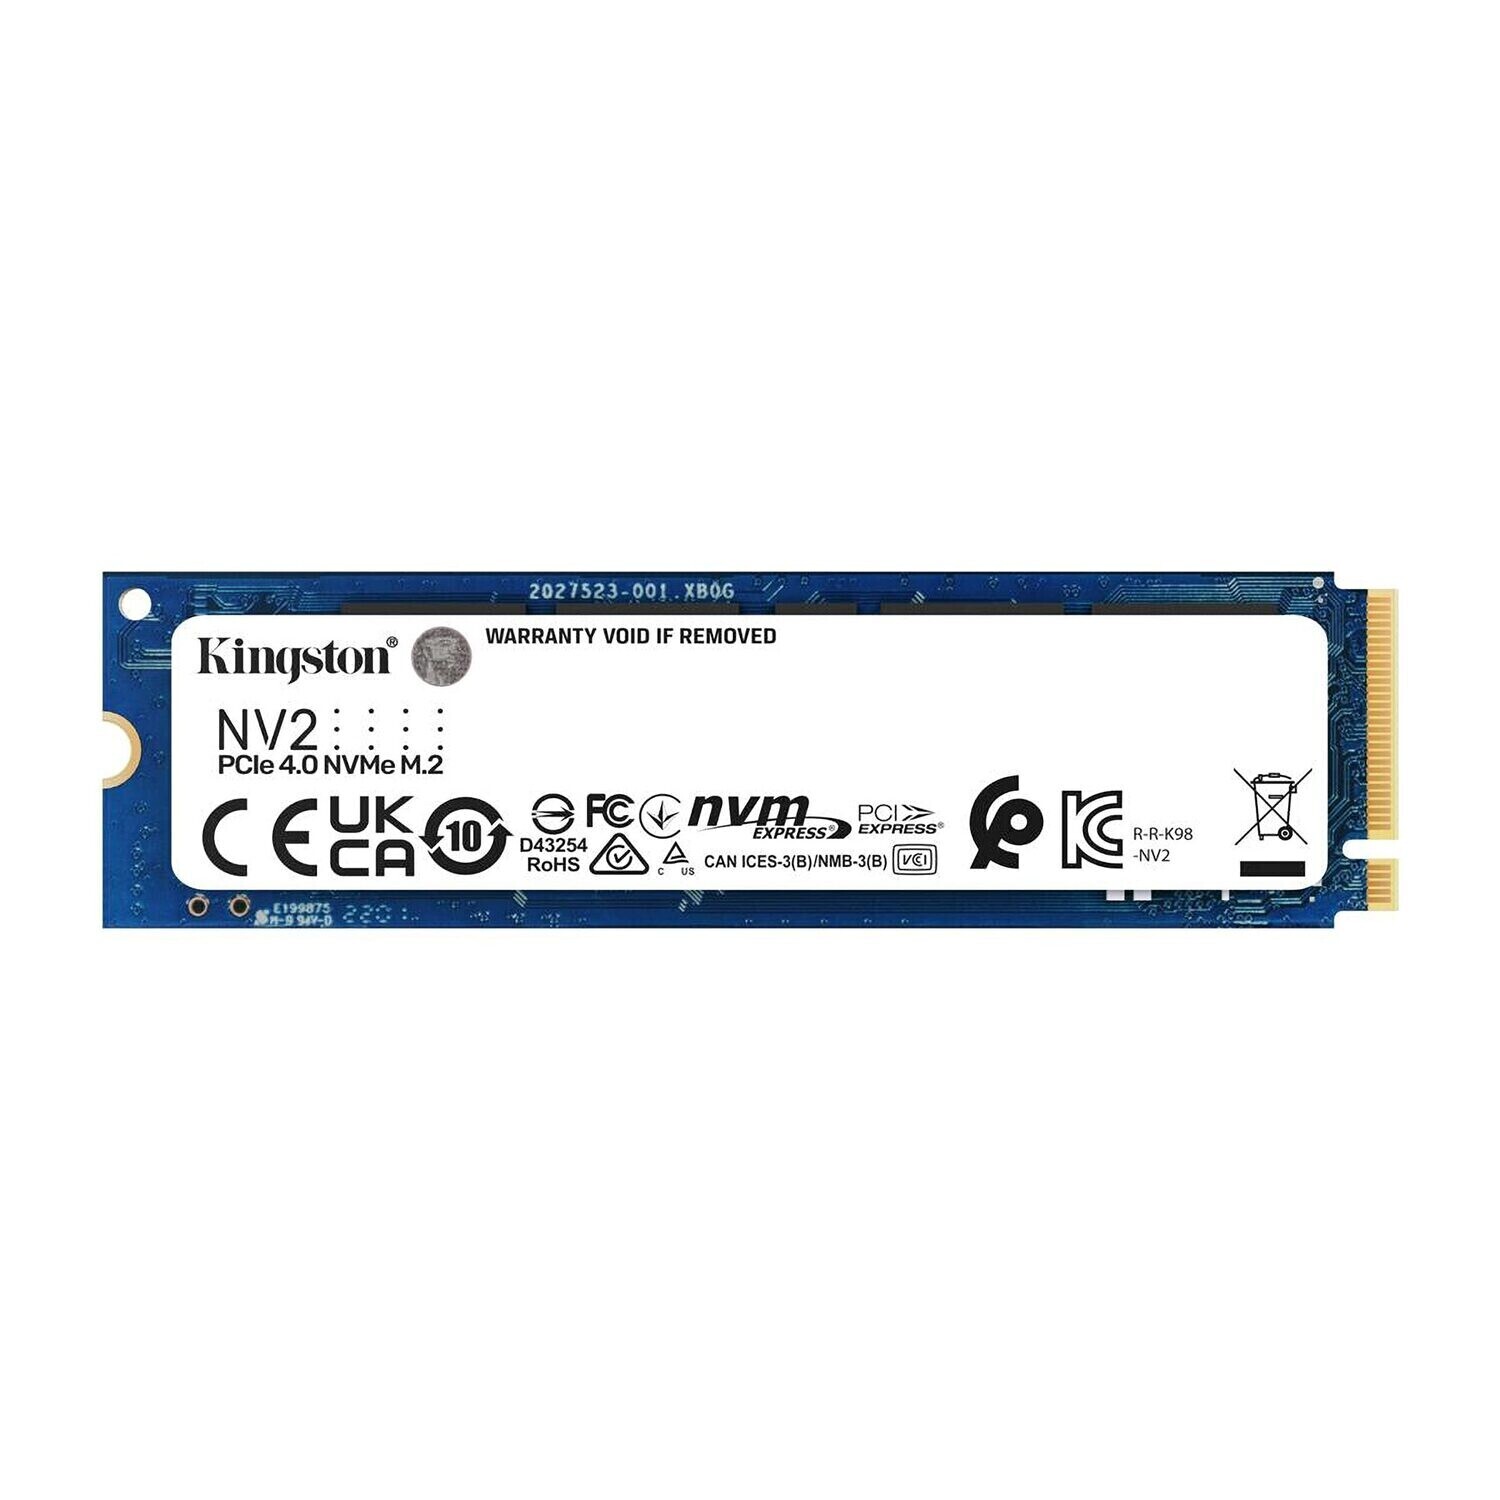 Kingston 500GB NV2 M.2 2280 PCIe 4.0 NVMe SSD, up to 3500/2100MB/s